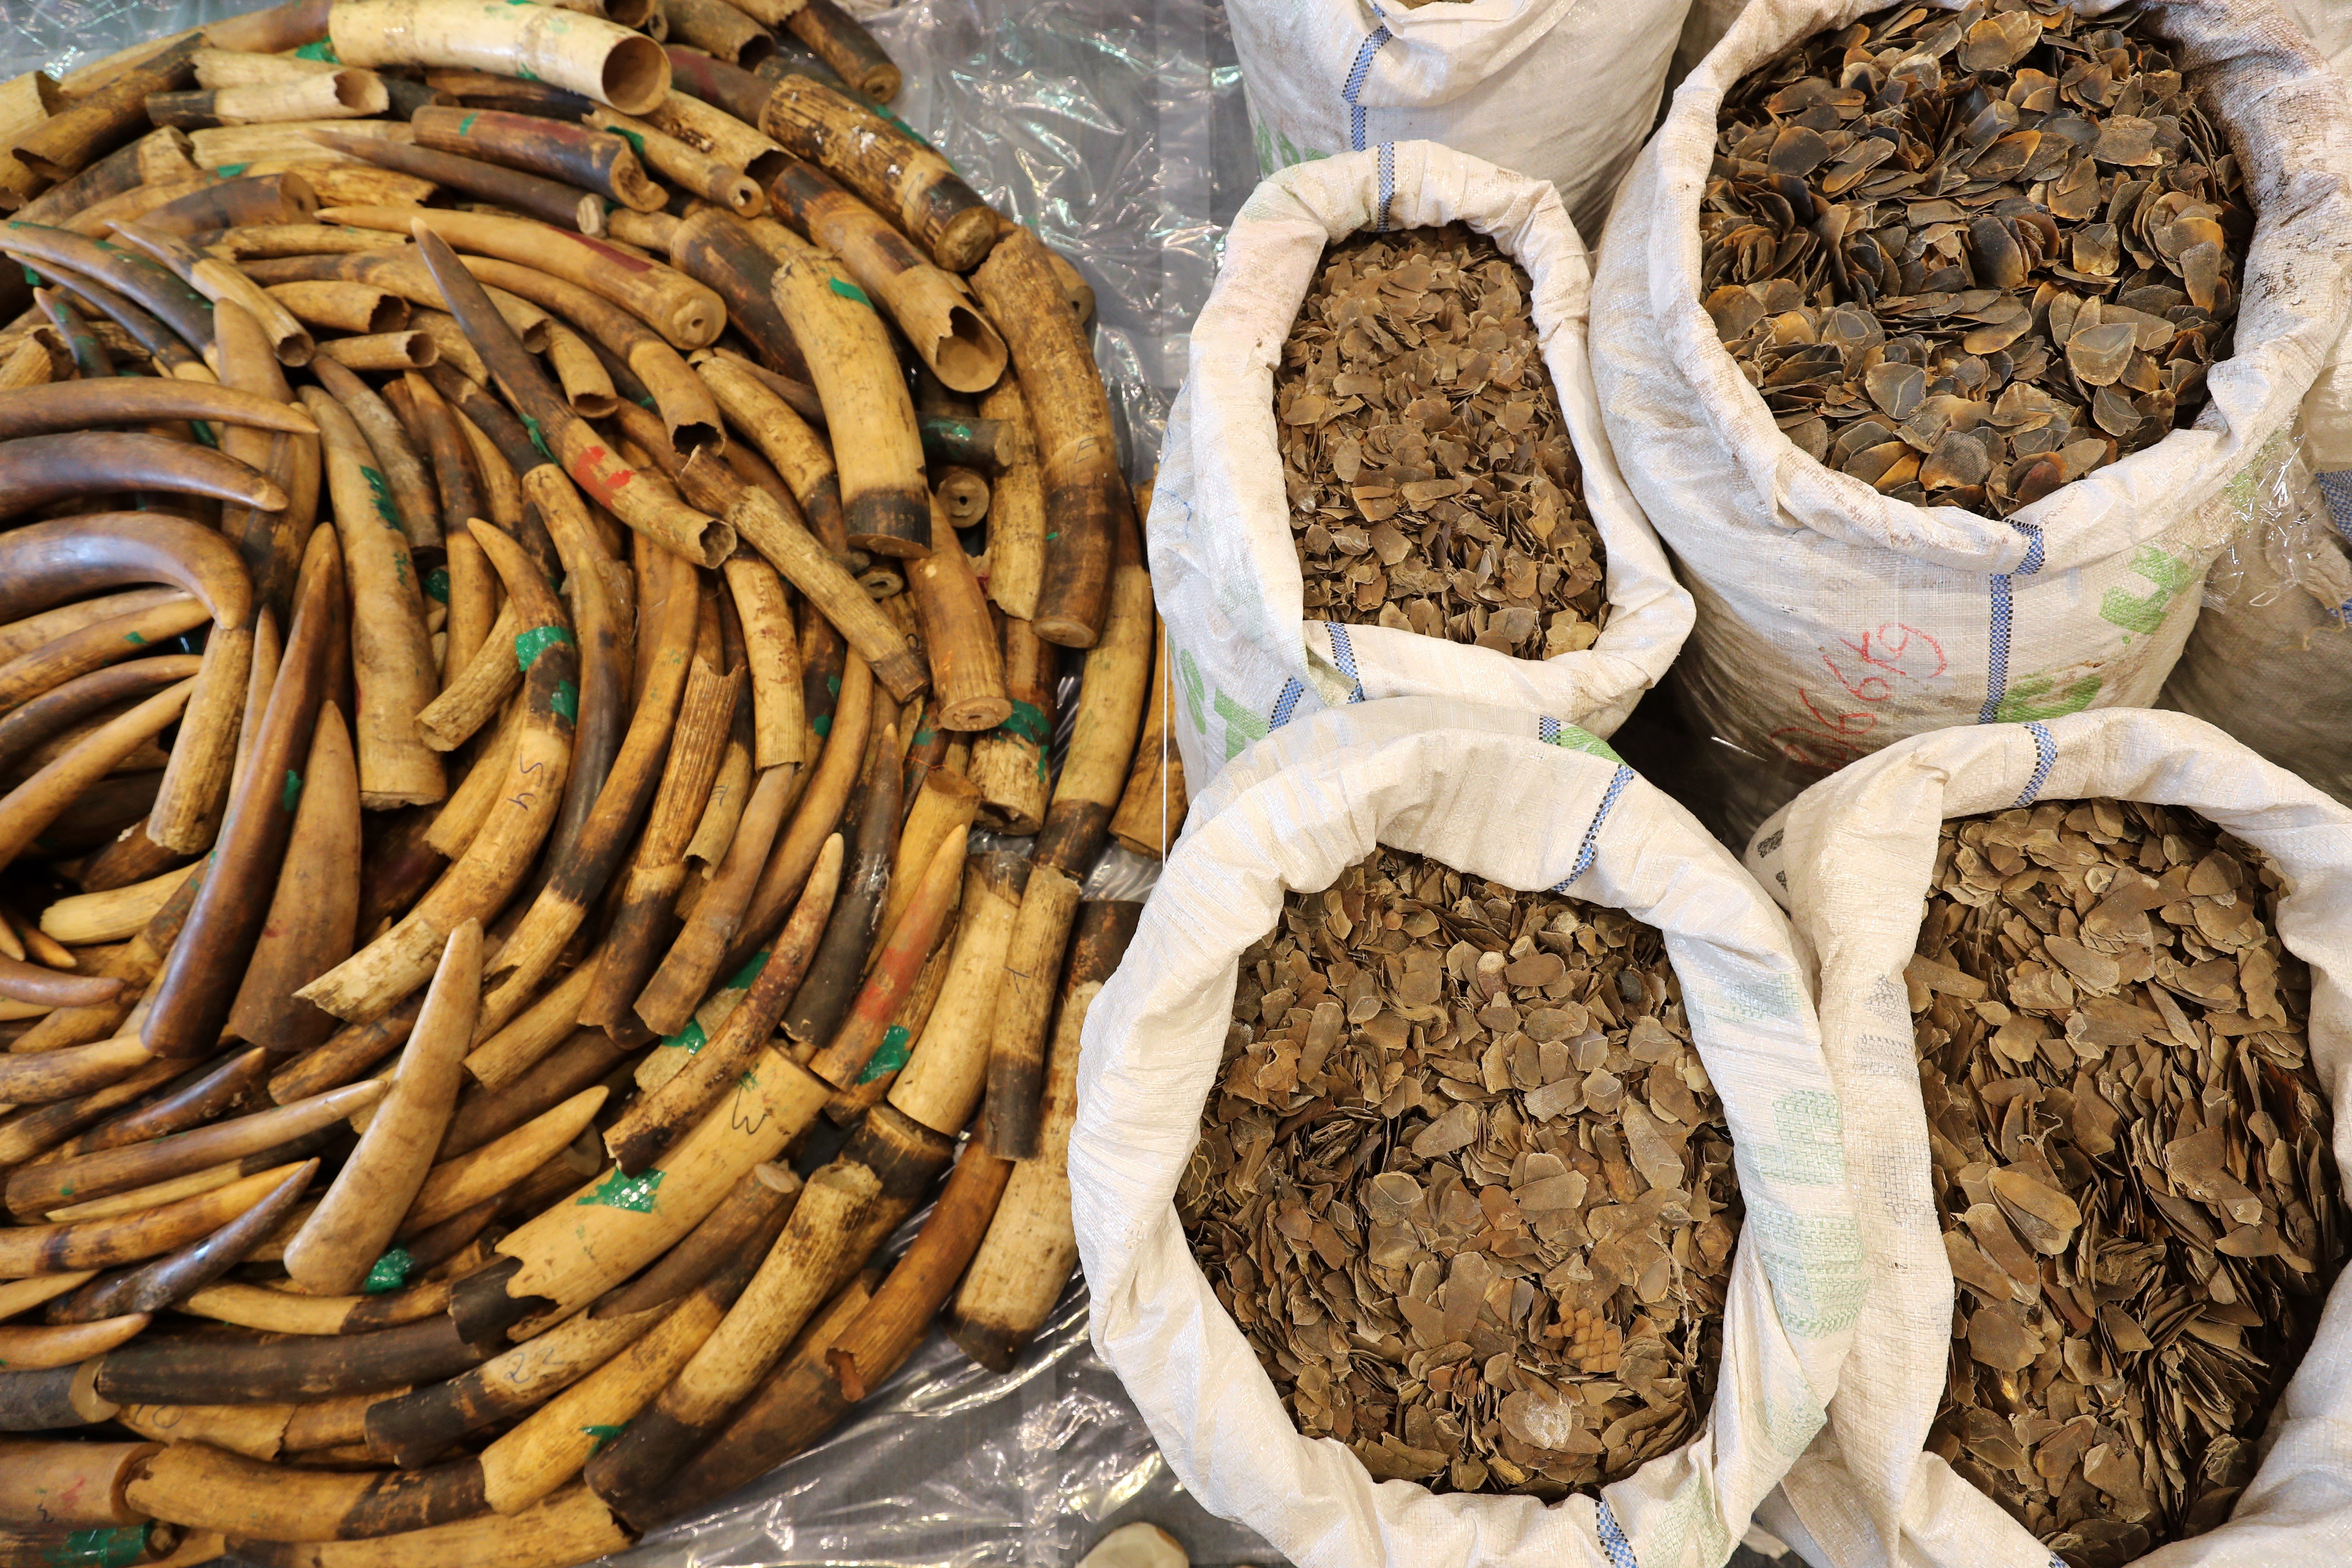 Pangolin scales and elephant tusks seized by Hong Kong Customs, seen at a February briefing on combating the smuggling of endangered species. Hong Kong should take the lead in stemming the haemorrhaging of the world’s wildlife. Photo: Winson Wong